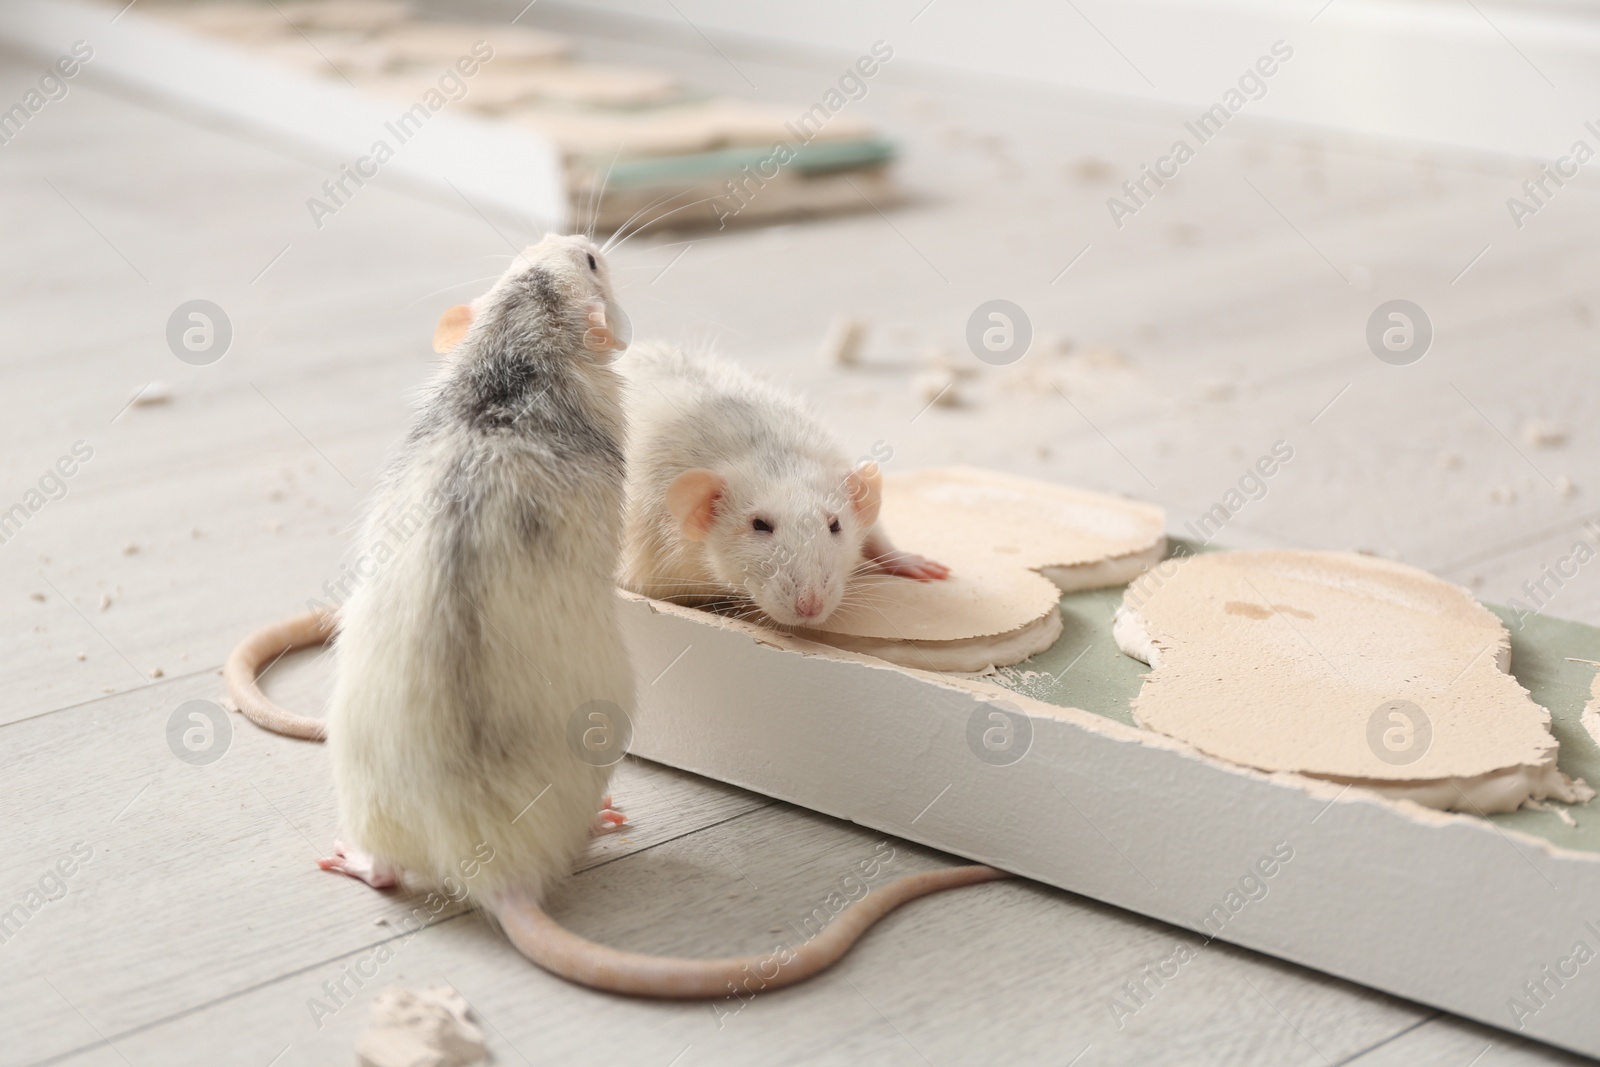 Photo of White rats gnawing baseboard indoors. Pest control